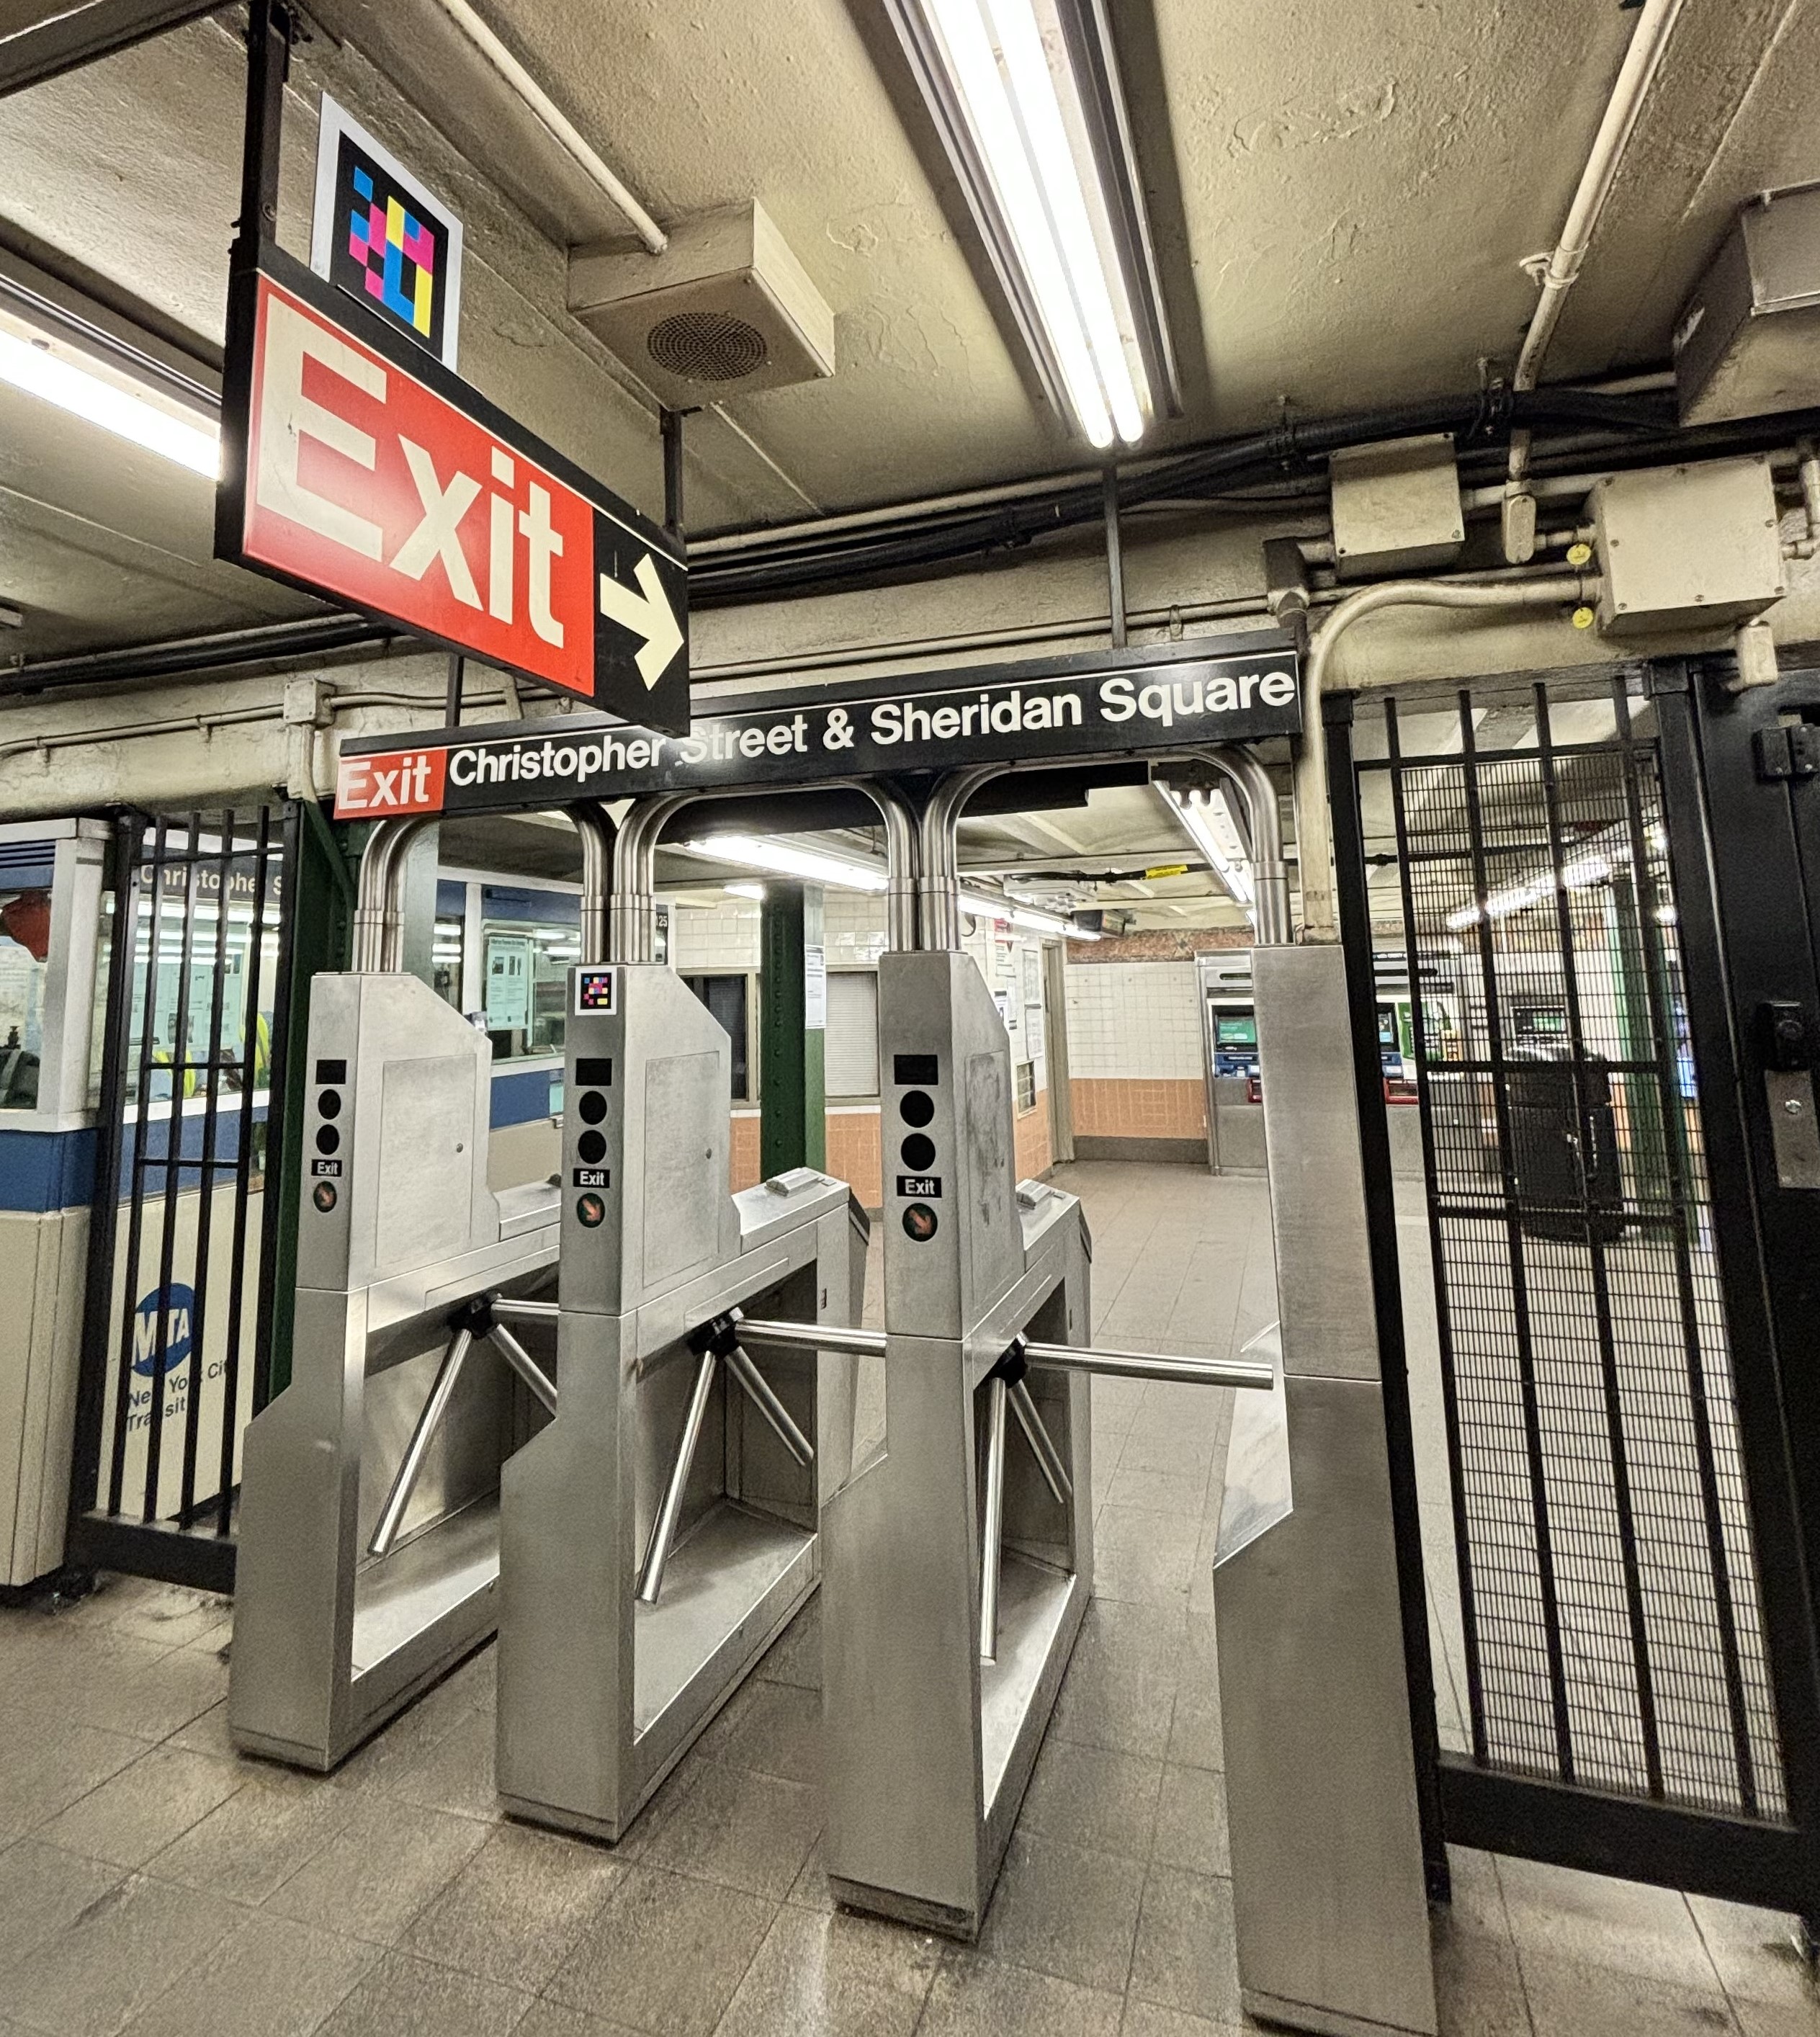 Exit turnstiles at Christopher St station. NaviLens codes are on the overhead exit sign and on the turnstiles.